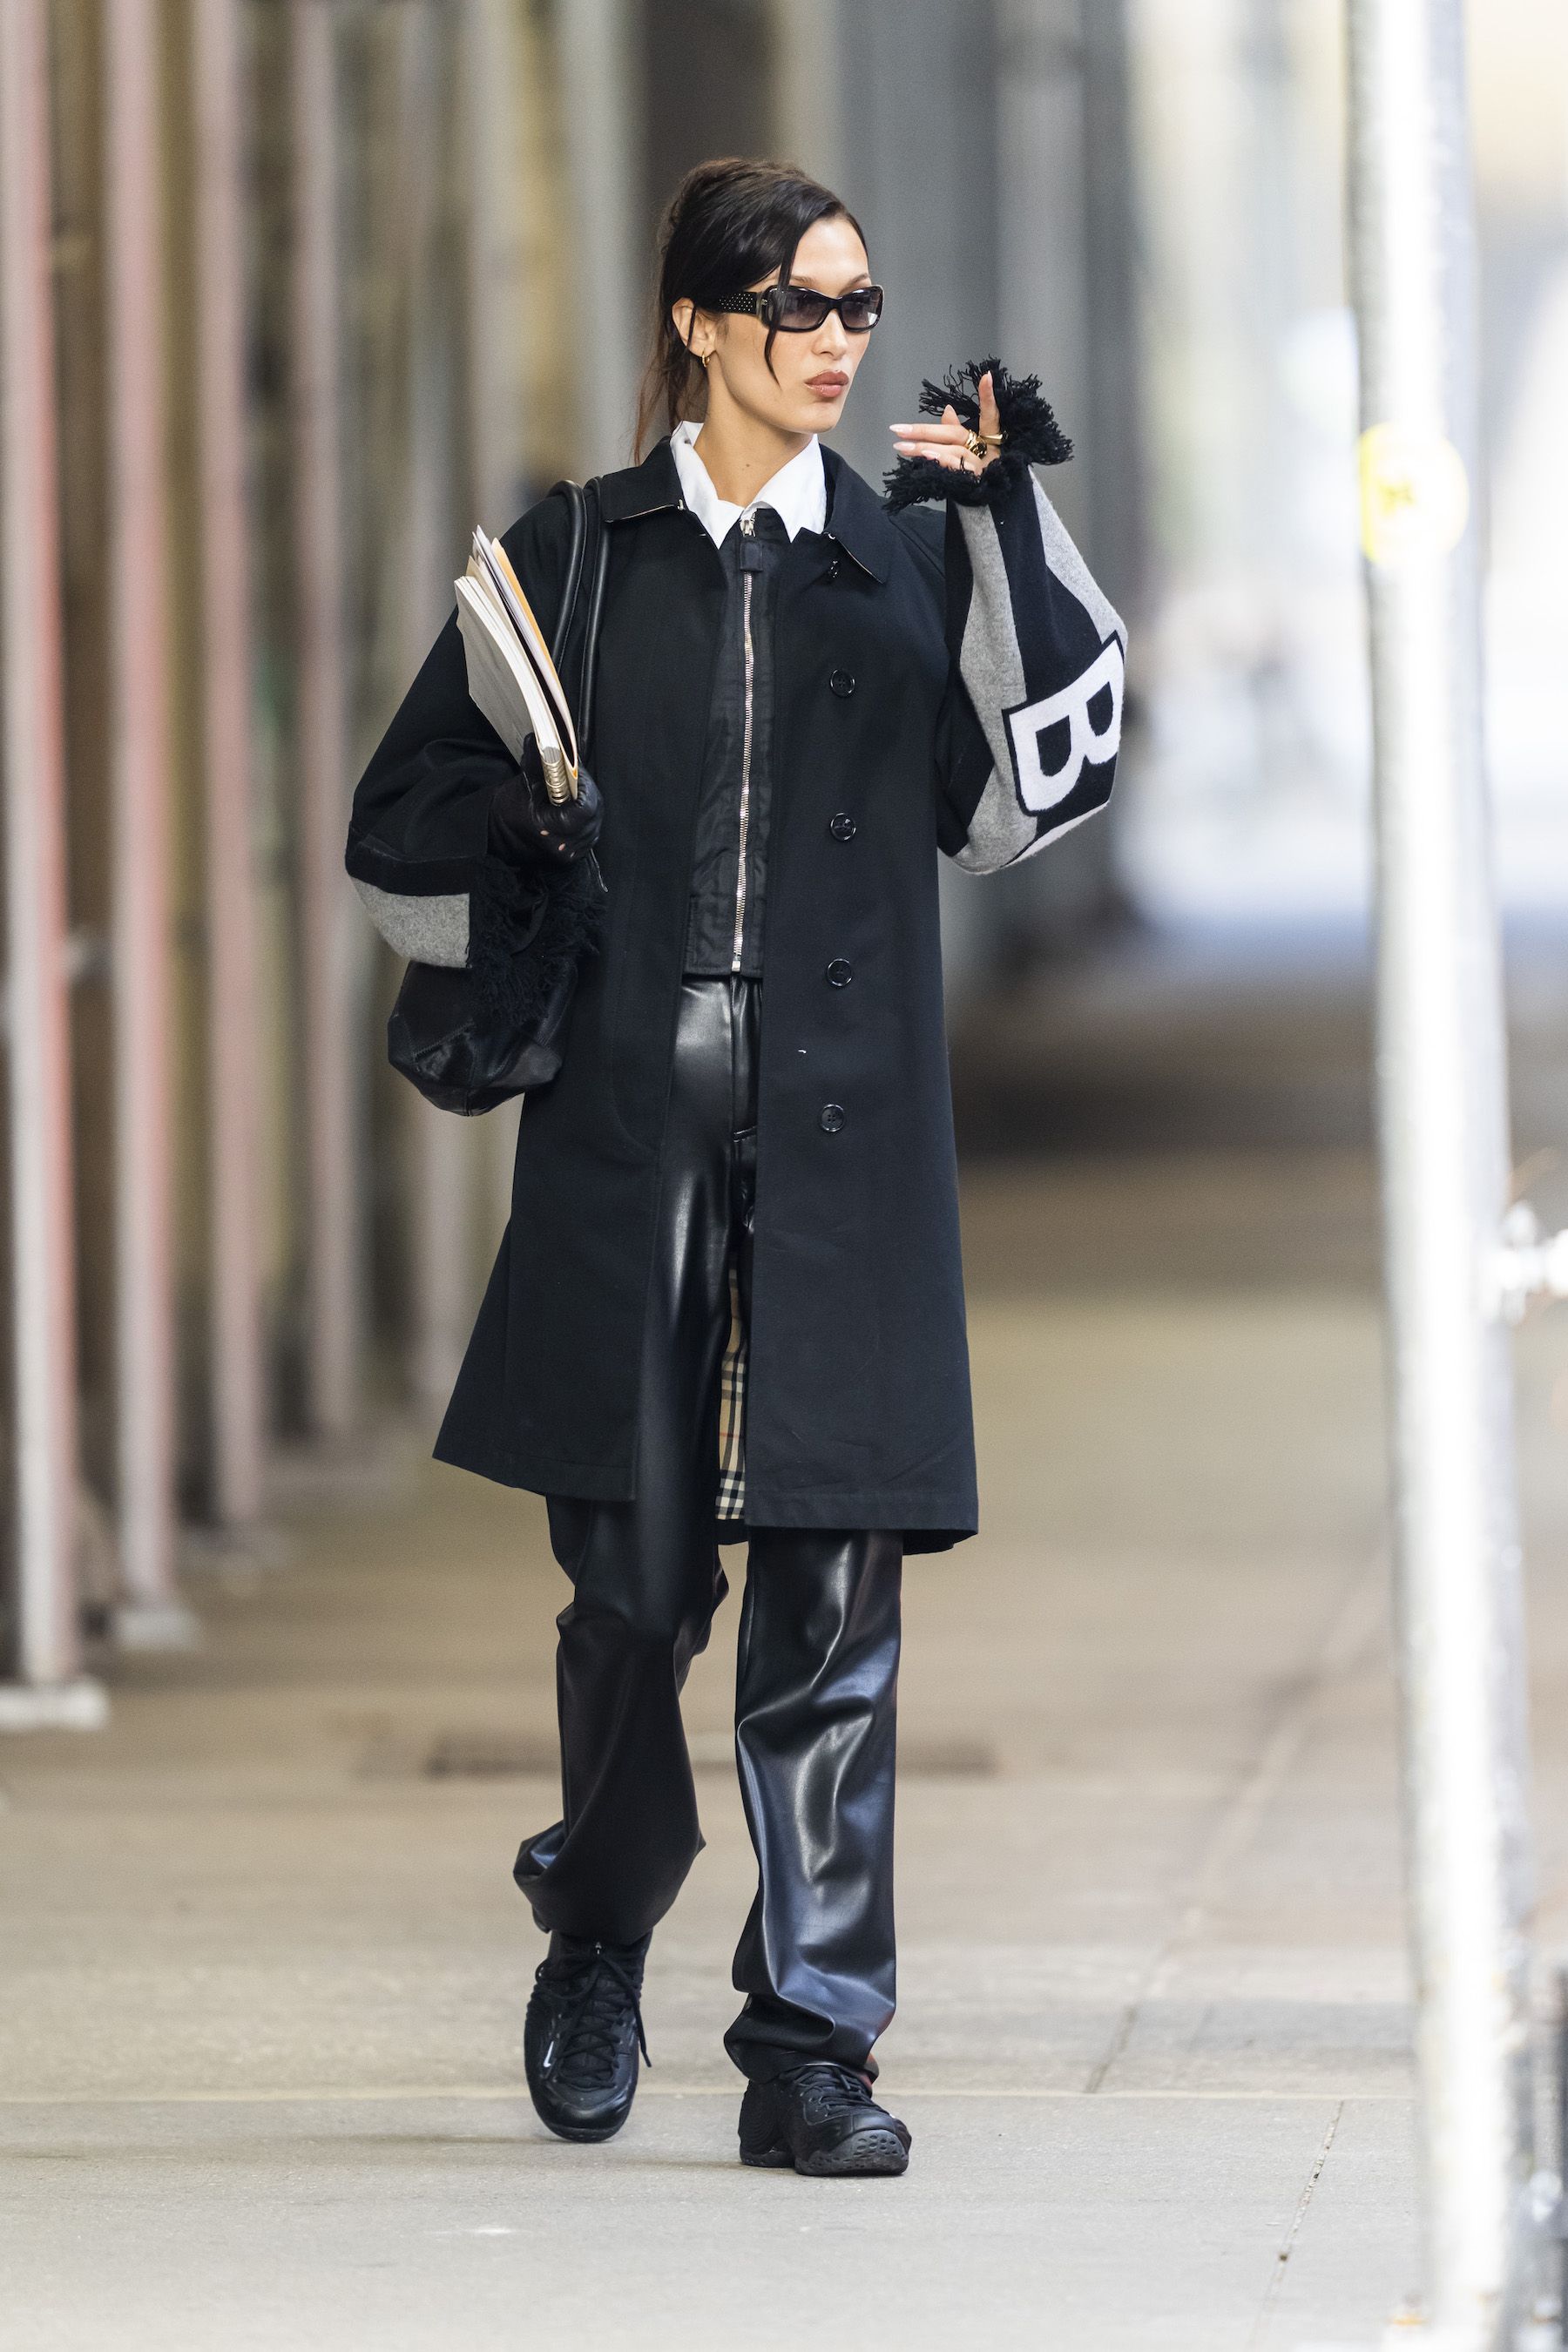 Motivere Sodavand kærlighed Bella Hadid Pairs a Burberry Coat with Leather Trousers